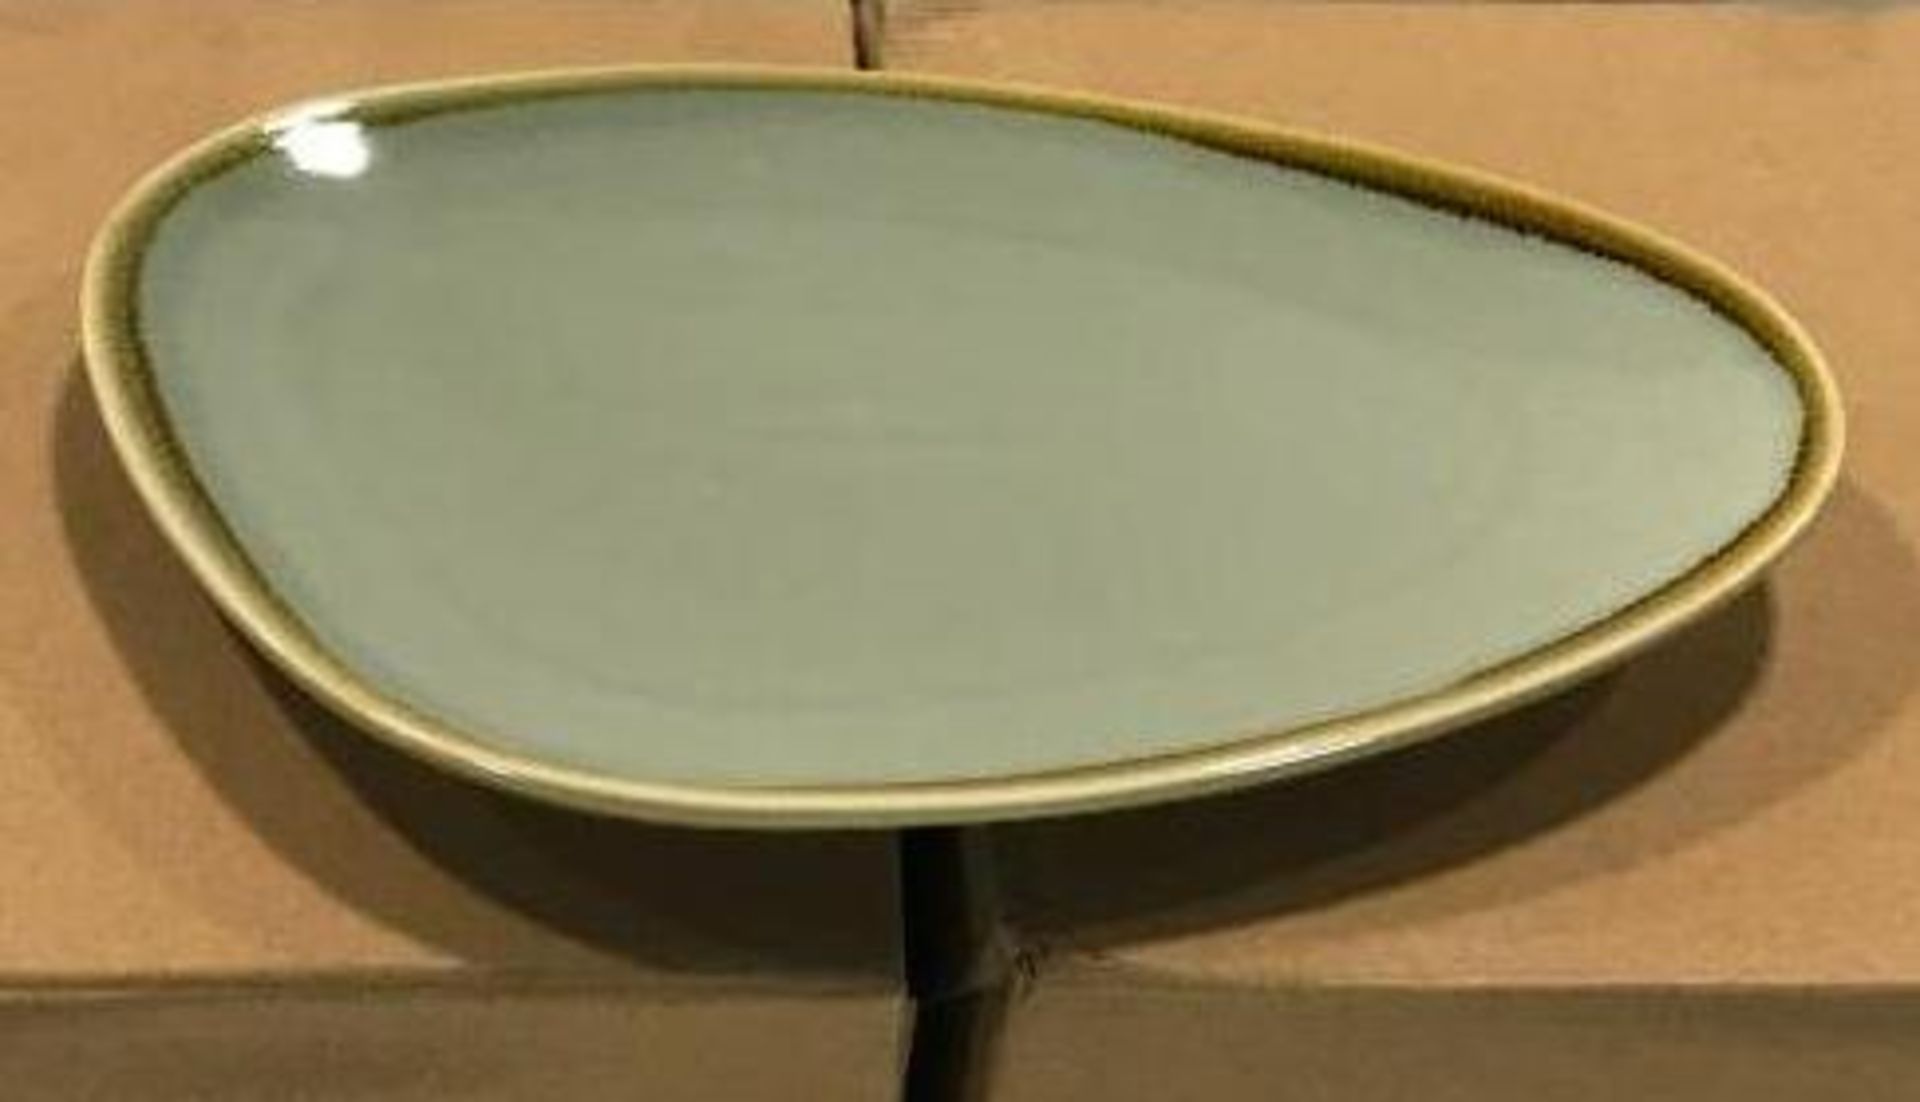 4 CASES OF TERRASTONE 10" SAGE GREEN OVAL PLATTER - 12/CASE, ARCOROC - NEW - Image 3 of 3